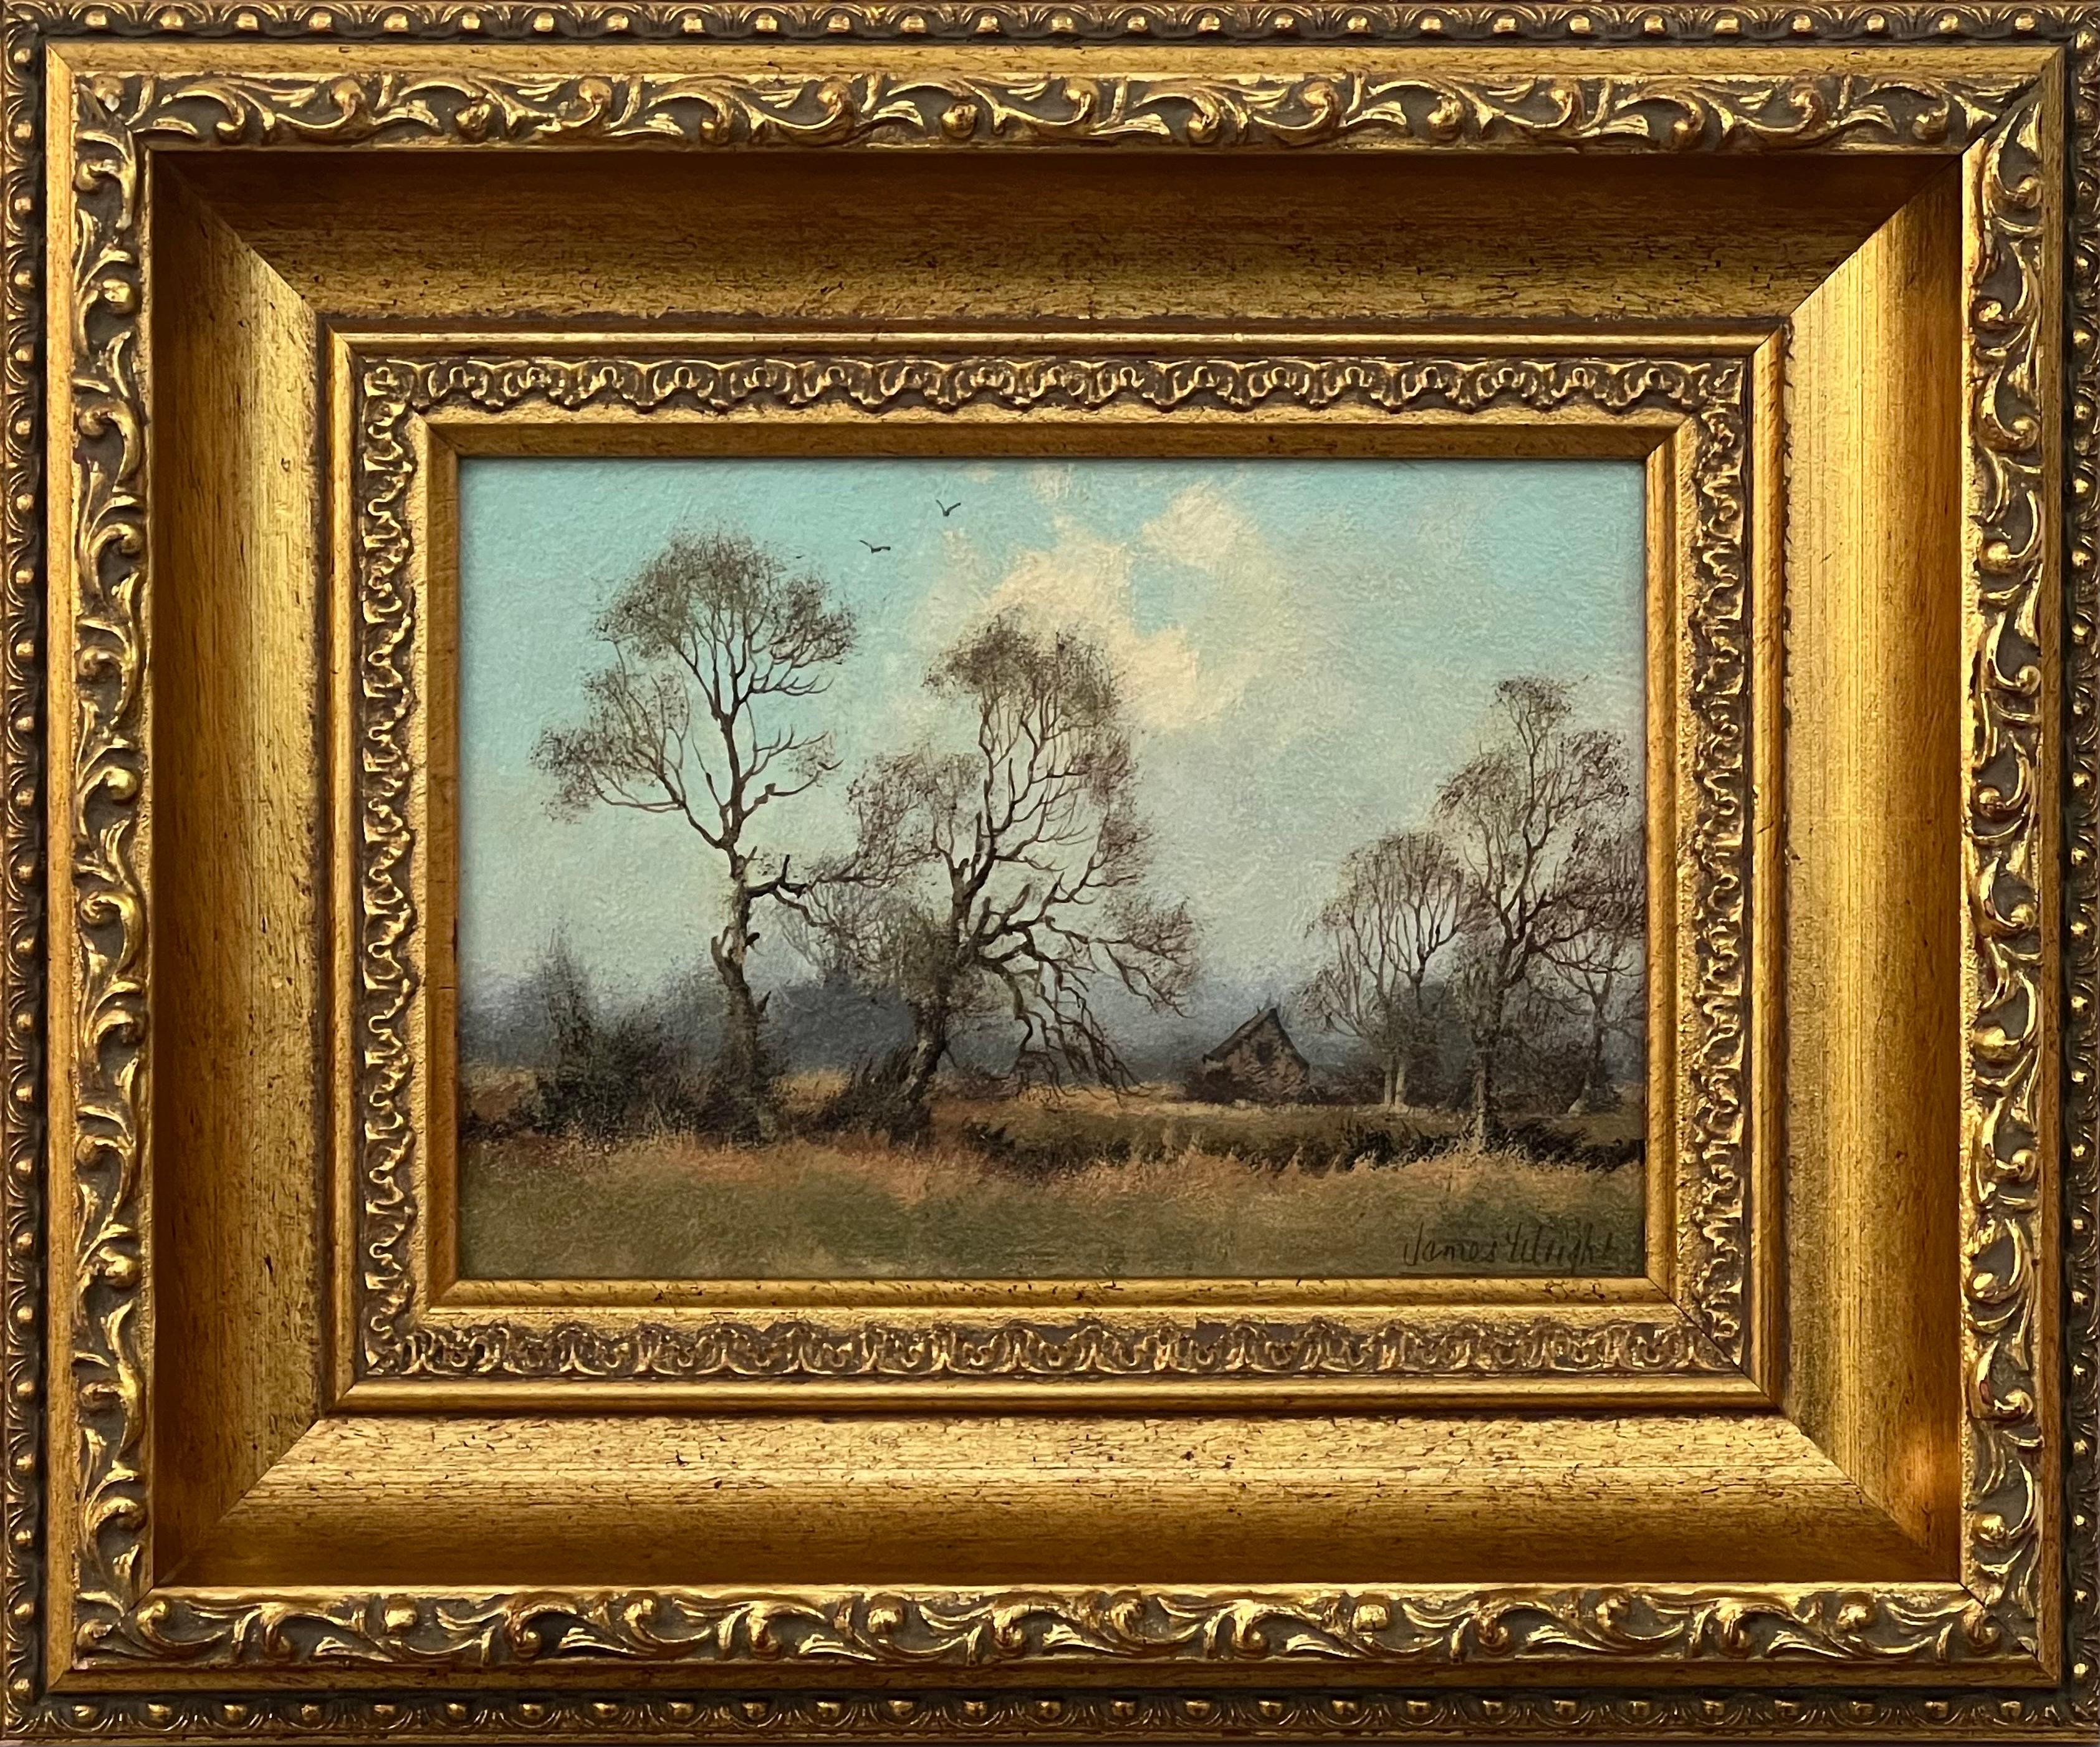 Trees & Cottage in the English Countryside by 20th Century Landscape Artist